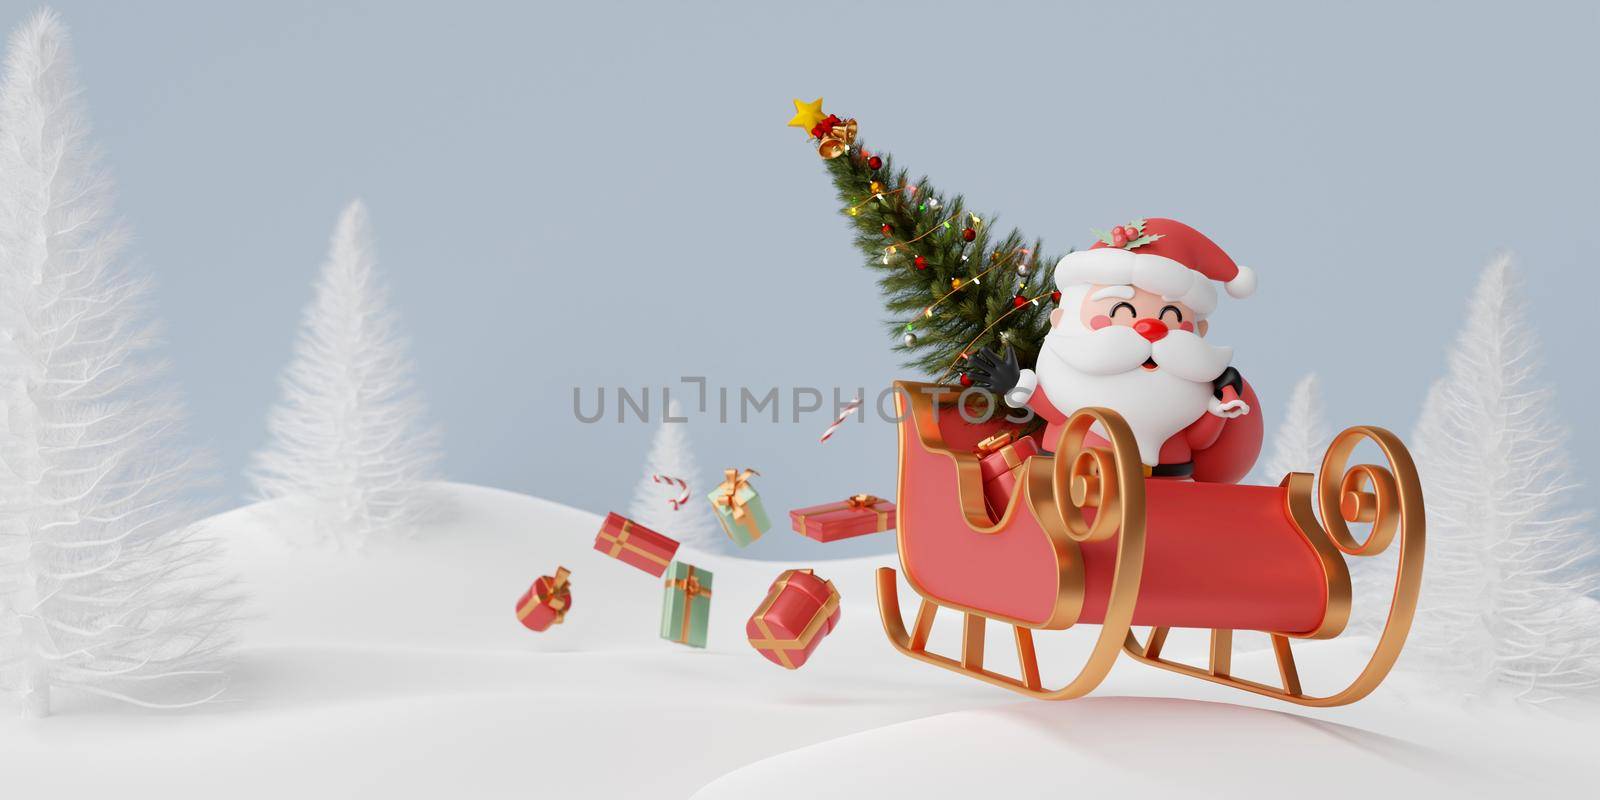 Santa Claus on sleigh with Christmas gift in pine forest, Merry Christmas, 3d illustration